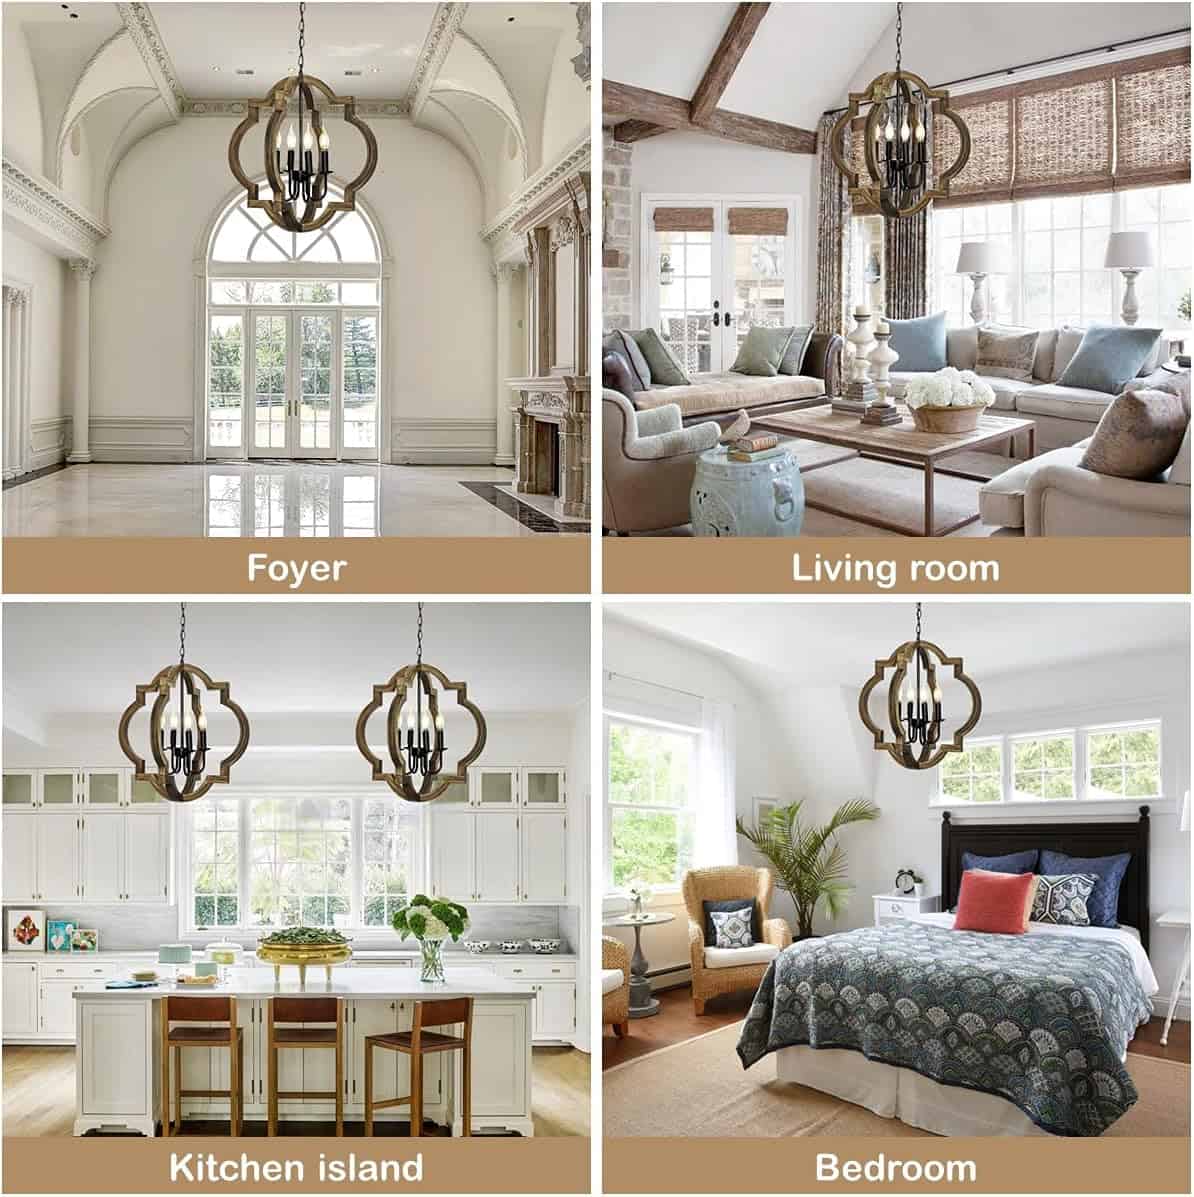 21.7 Farmhouse orb Chandelier 4-Light Adjustable Height Handmade Rustic Wood Light Fixture for Foyer Dining&Living Room Kitchen Island Entryway Breakfast AreaColour Black 6